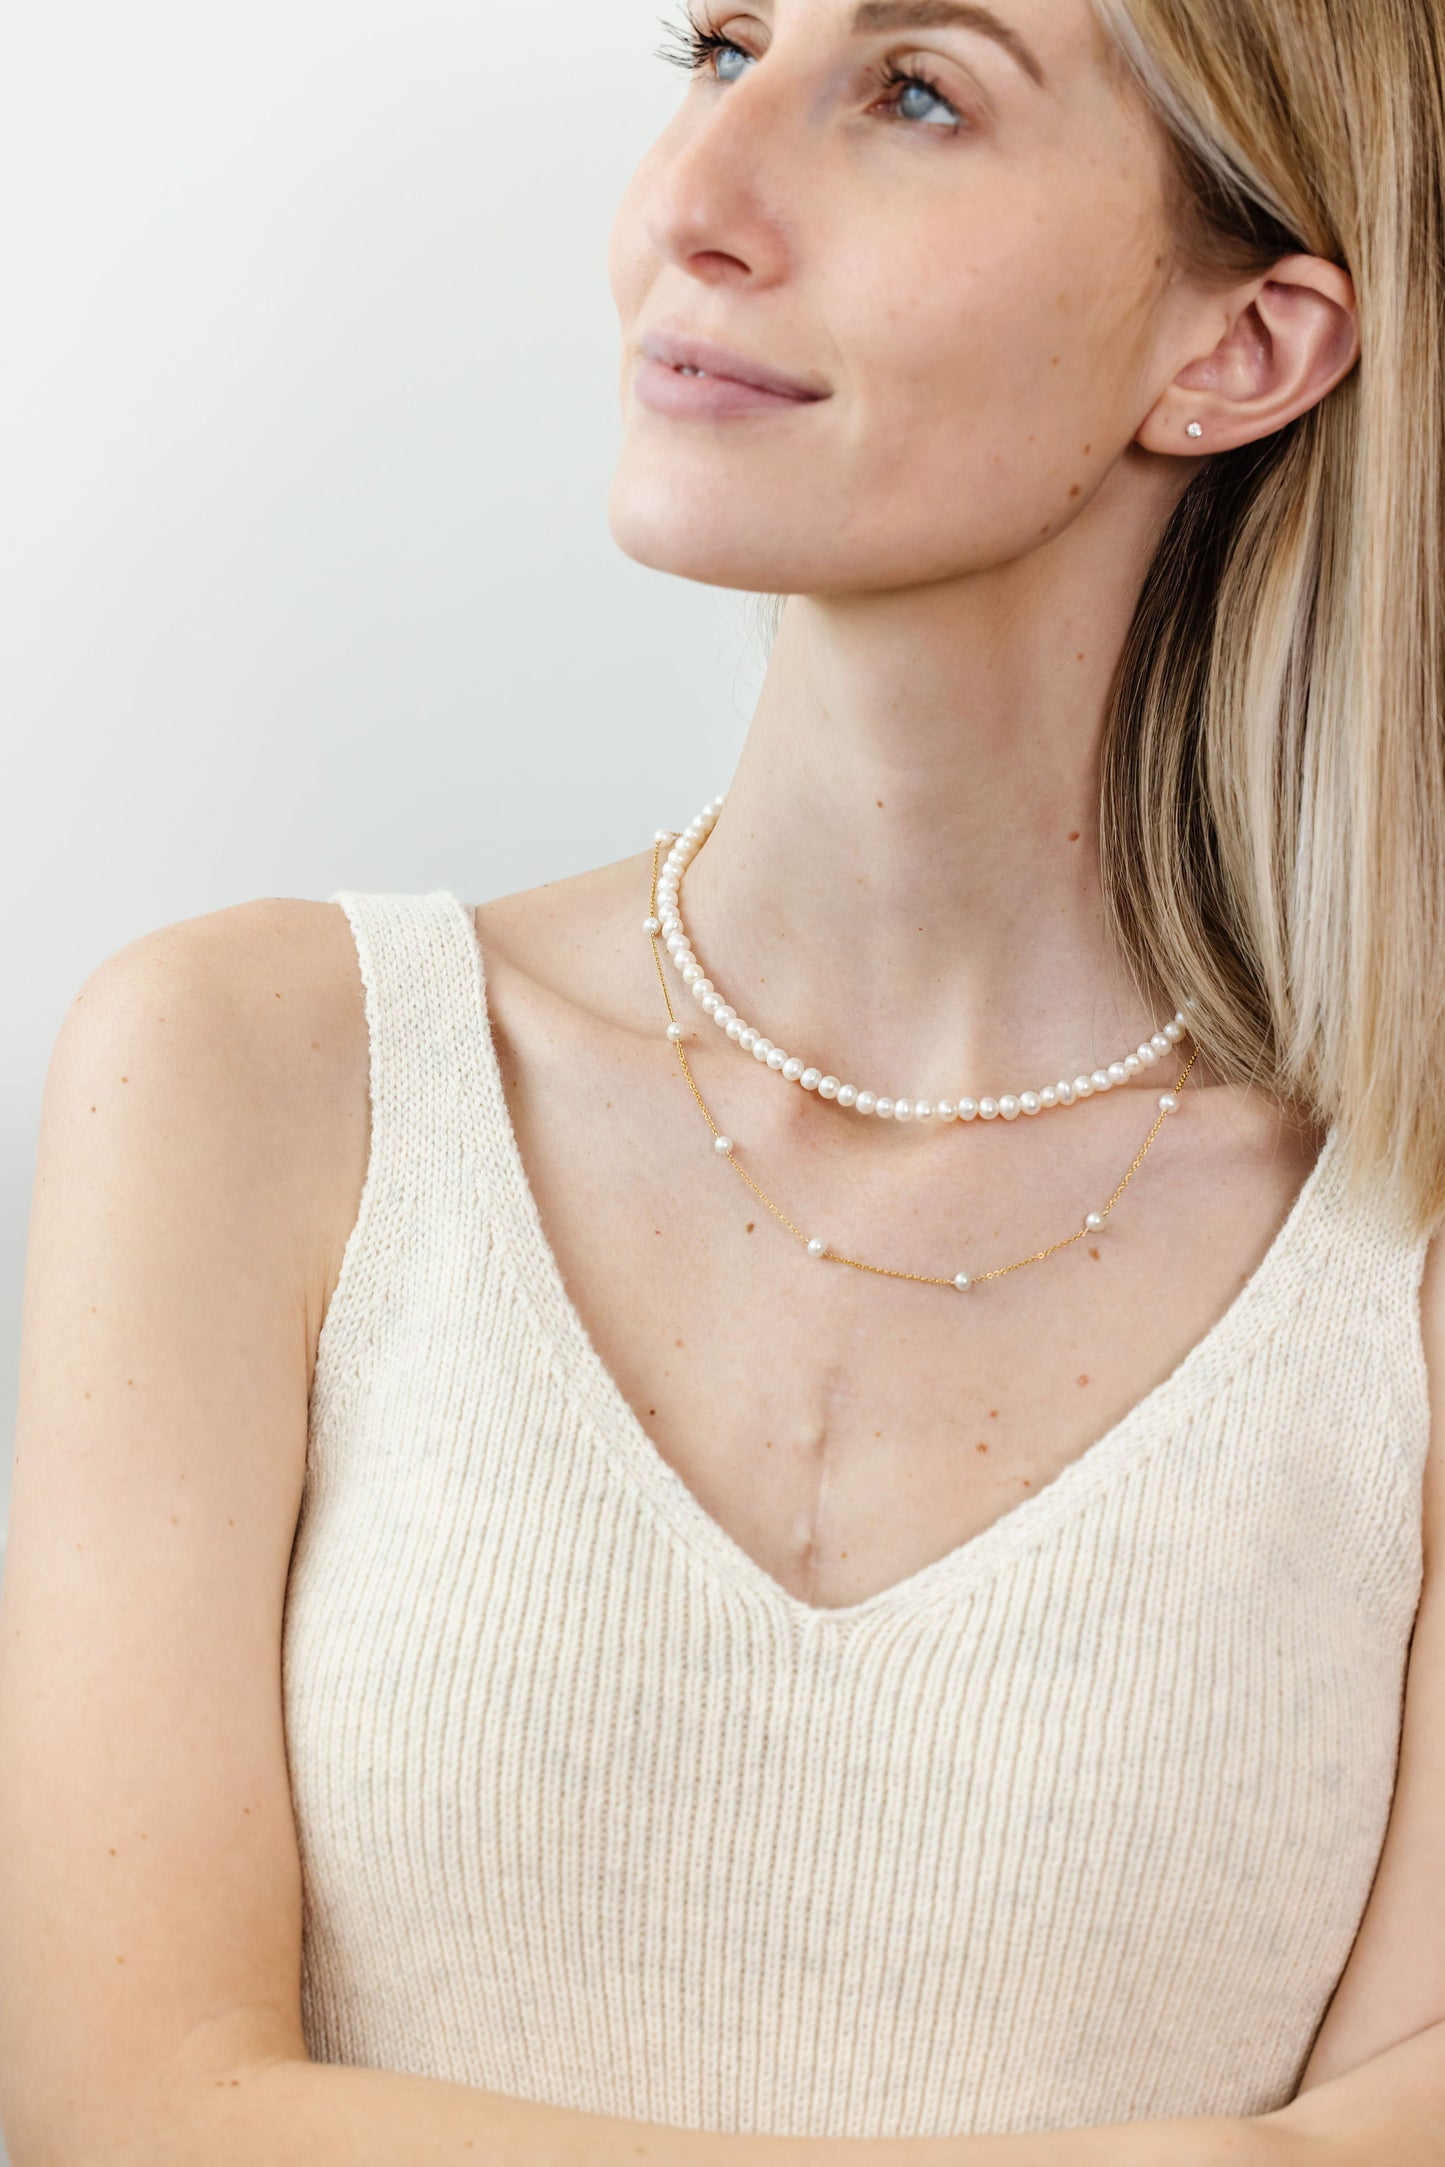 Aobei Pearl Cultured Freshwater Pearl Bar Necklace ，Baroque Peal Pendant  Paperclip Chain Choker 18K Gold Plated Single Floating Pearl Necklace  Jewelry For Women.ETS-S1153